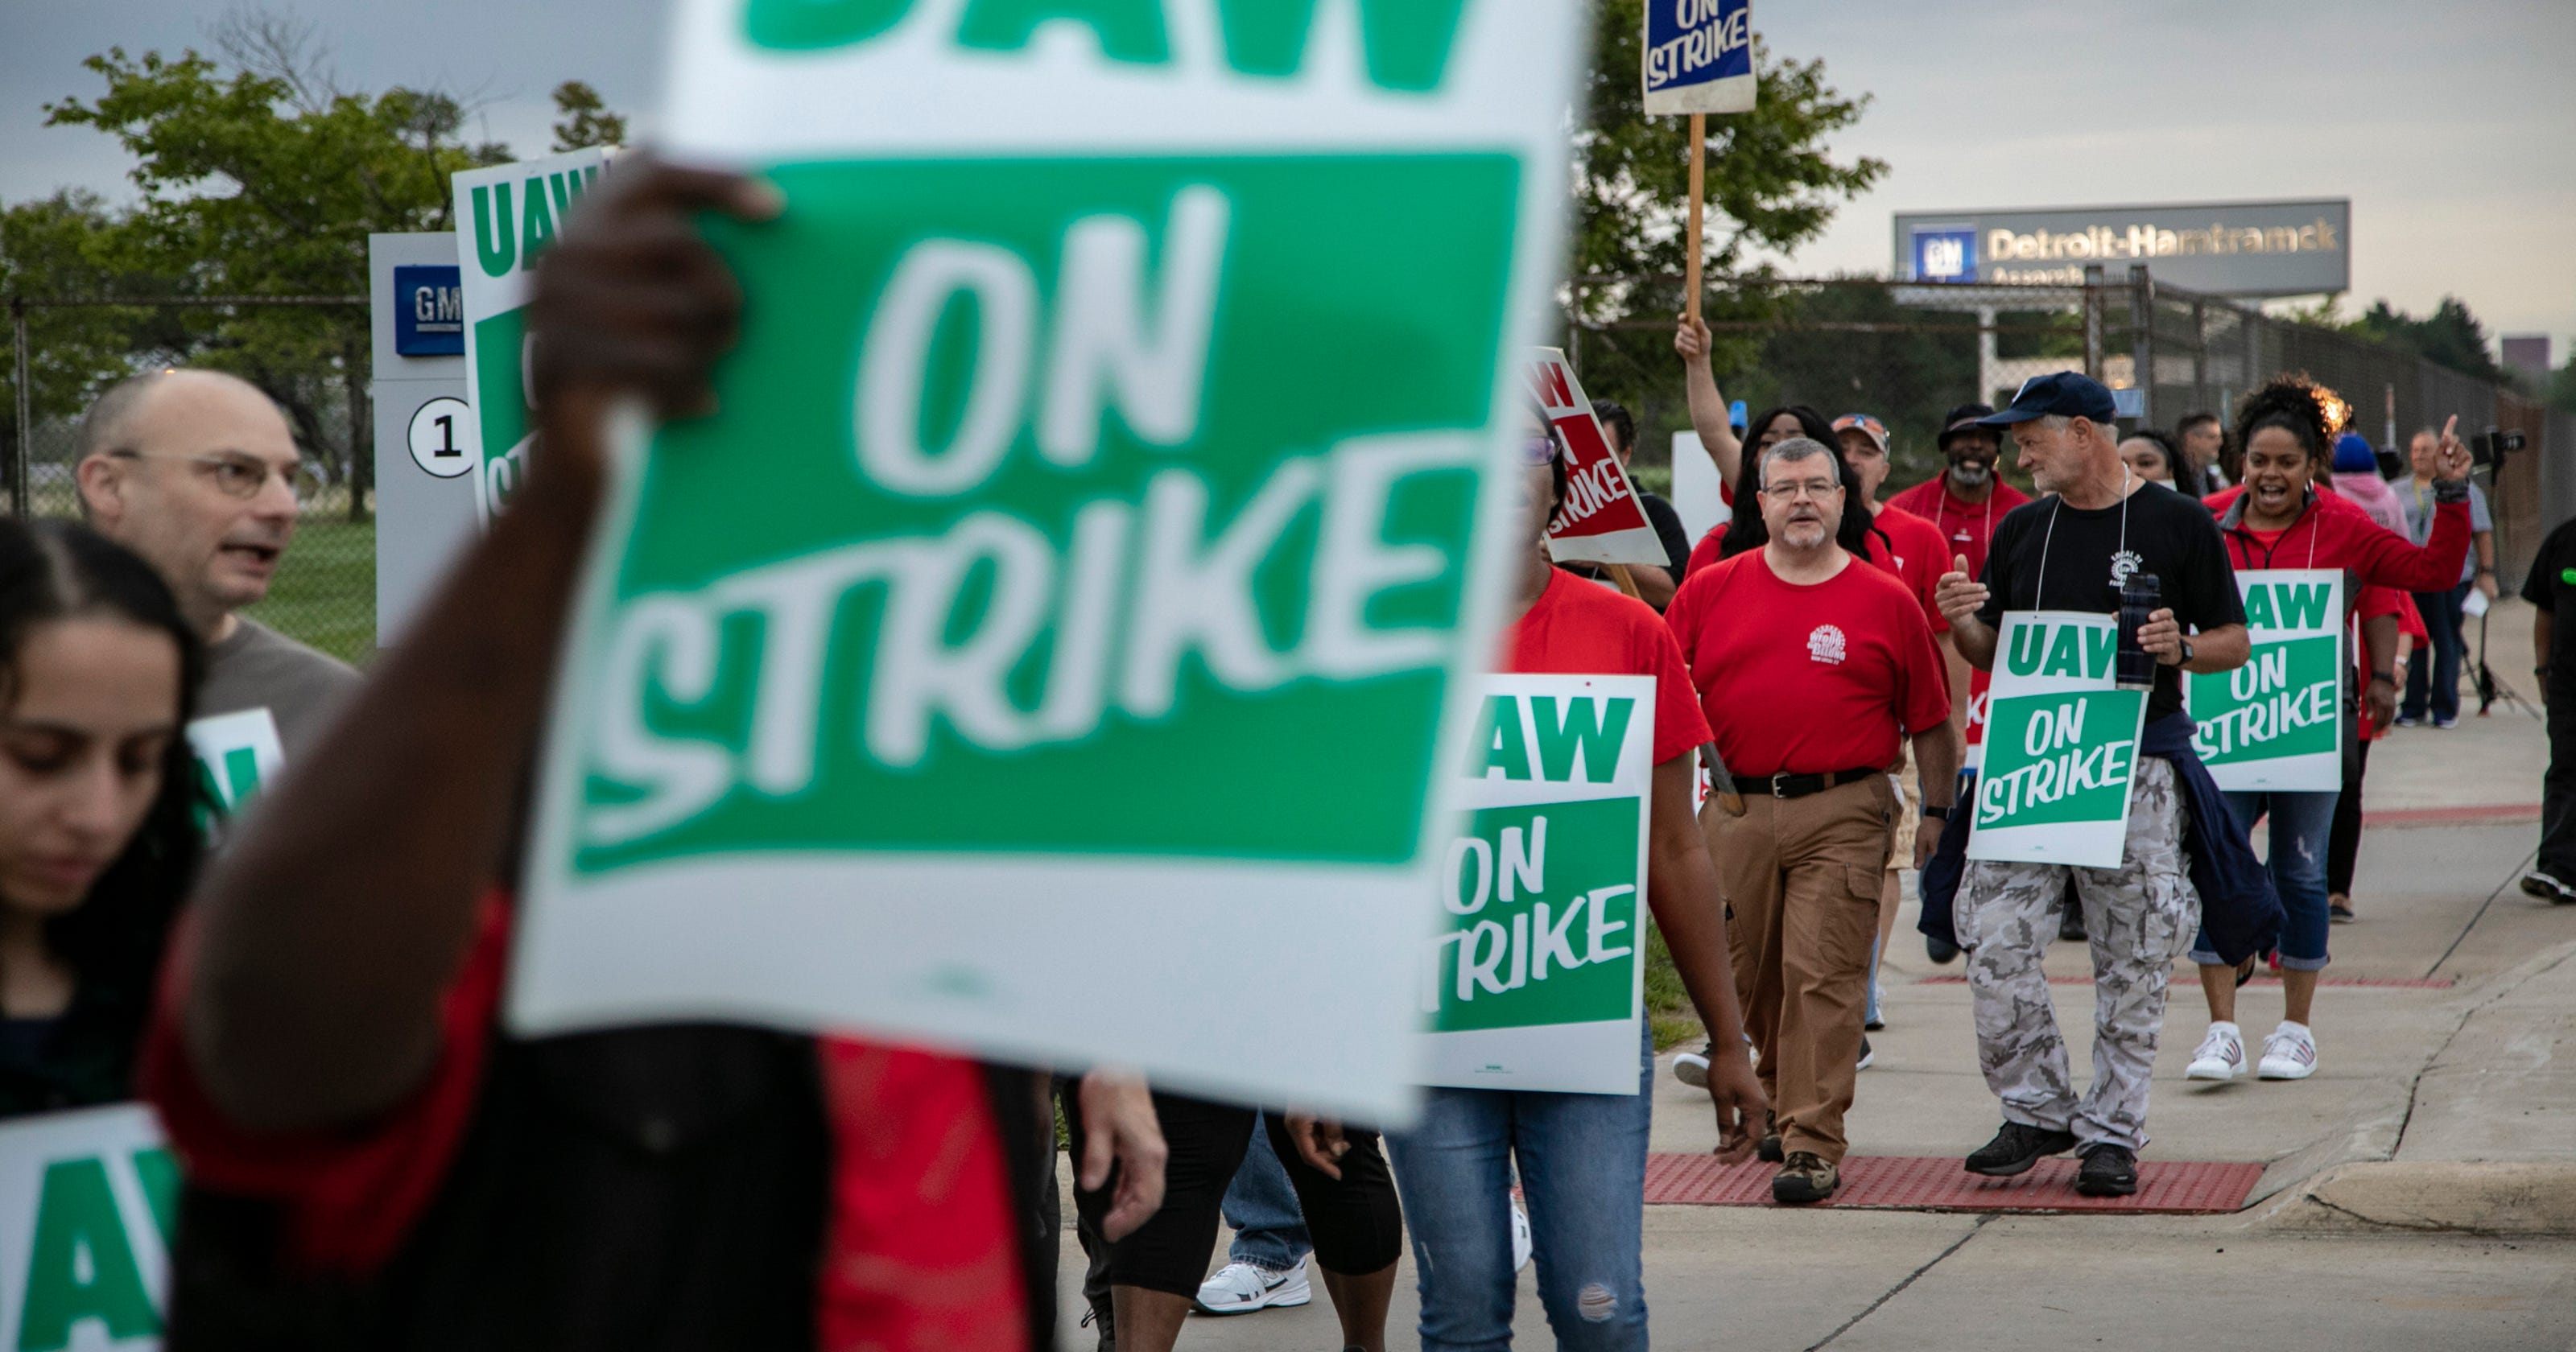 As UAW strike continues, workers just want fair shake from GM